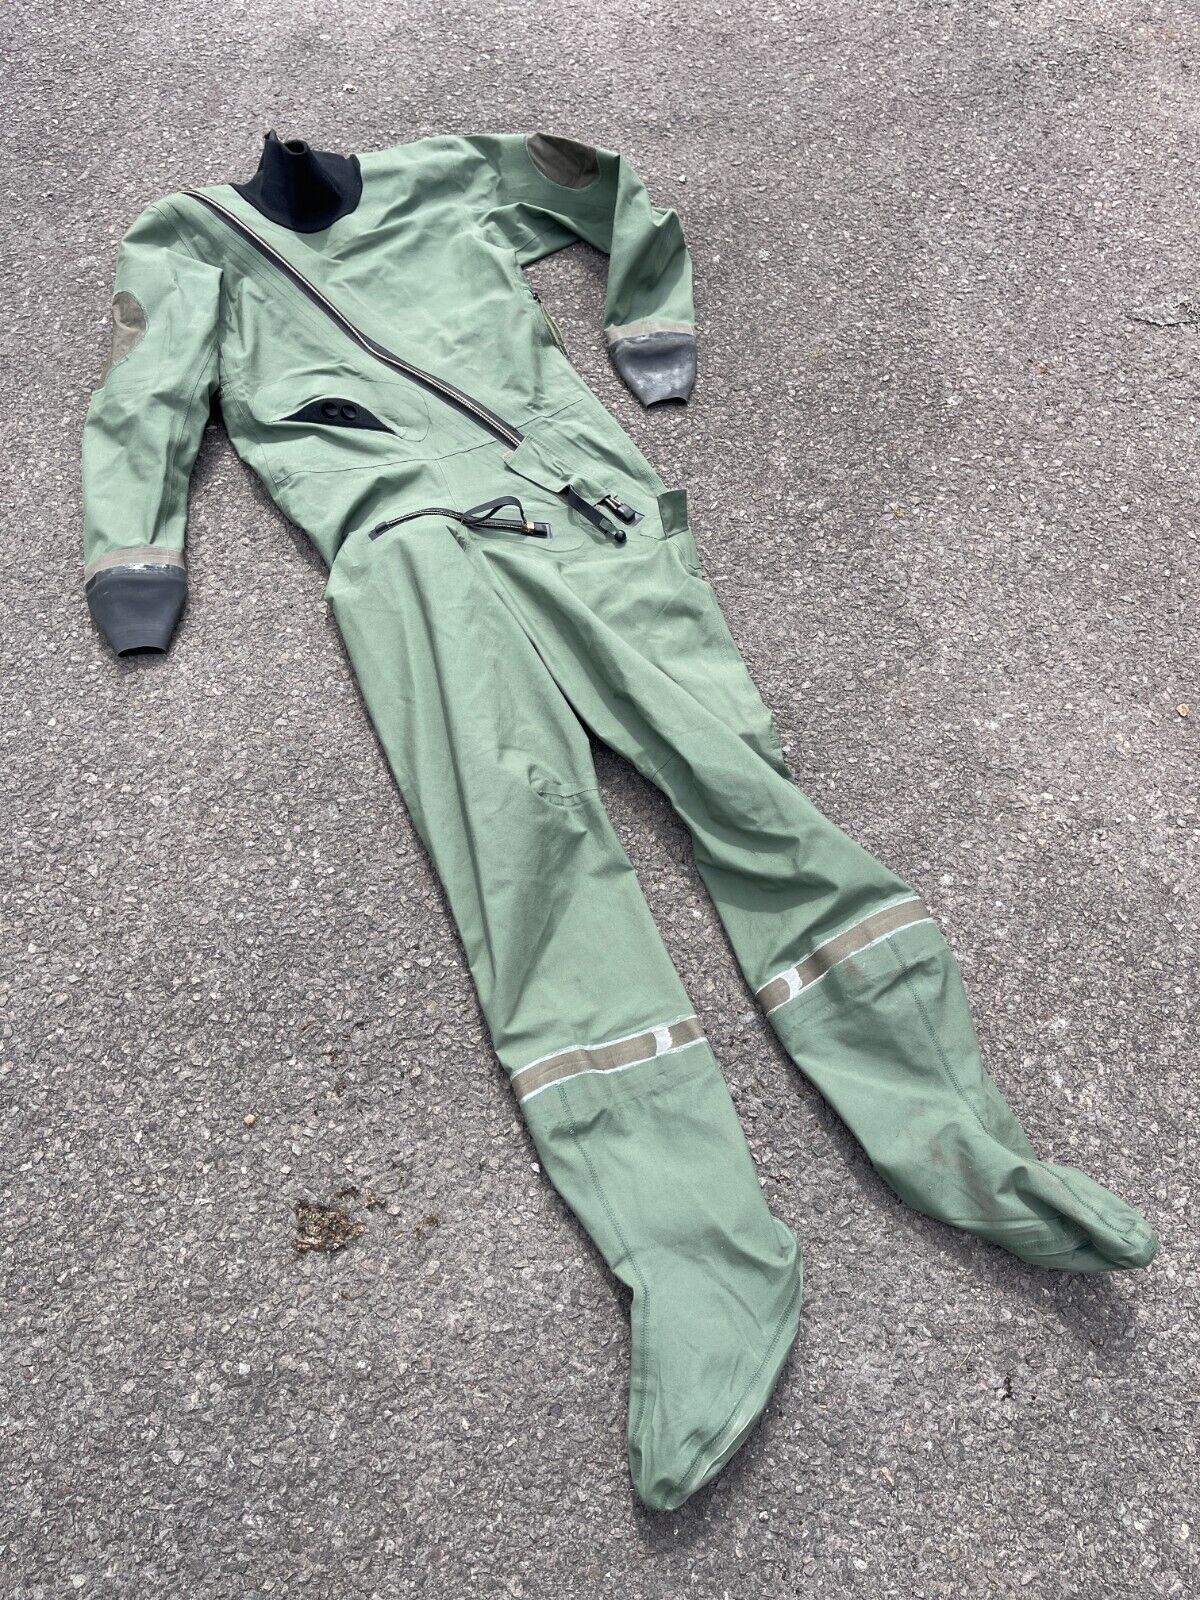 British Army Surplus RAF RFD Beaufort Immersion Protection Garment Dry Suit